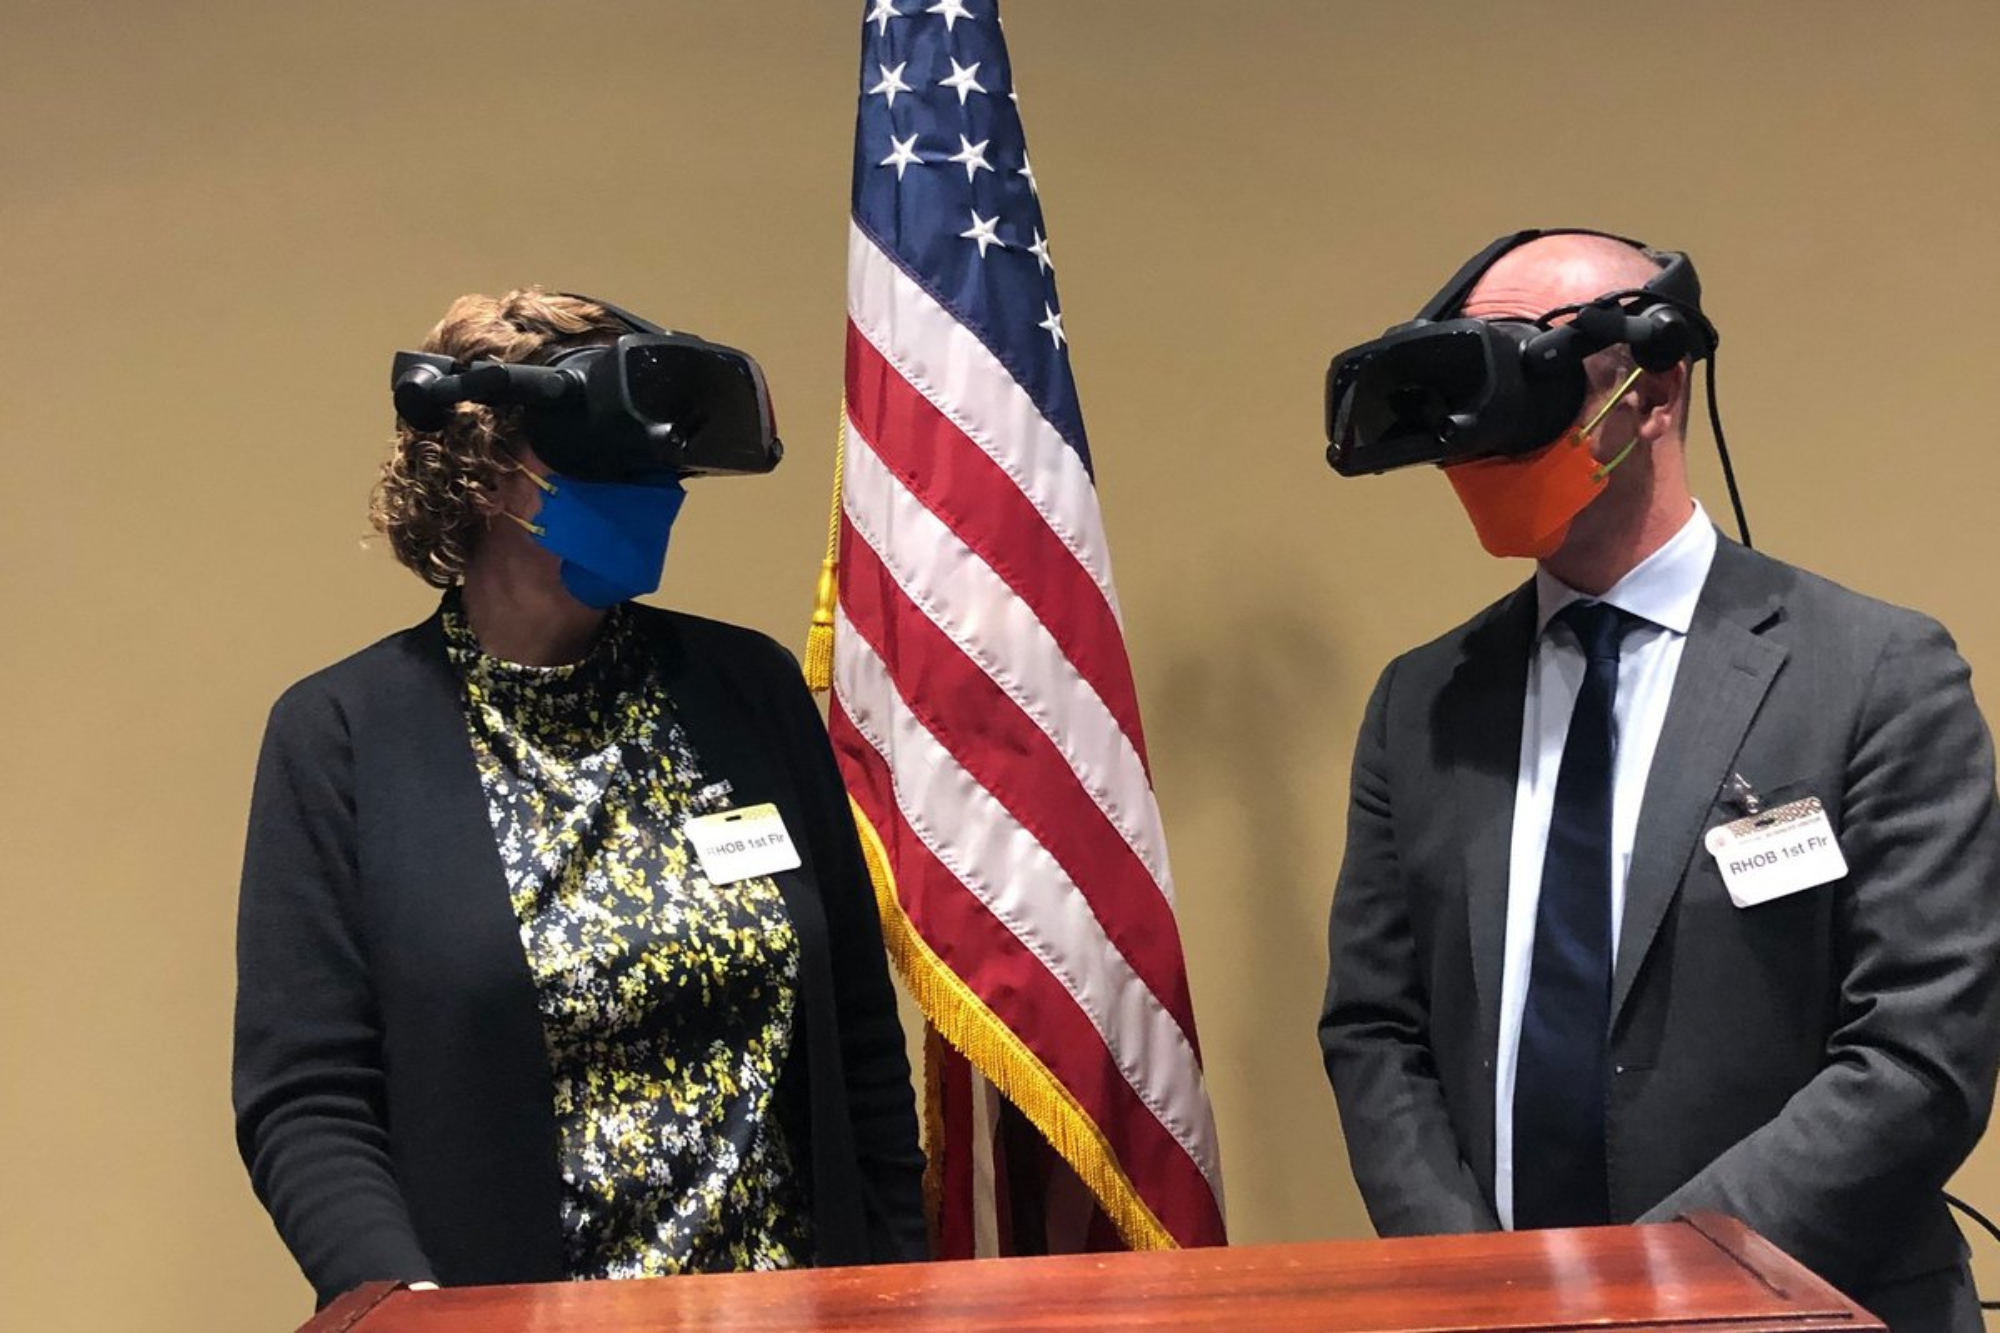 Sharon Weiner and Moritz Kütt presenting the "Nuclear Biscuit" VR experience in Capitol Hill. Photo courtesy of Sharon Weiner and Moritz Kütt.